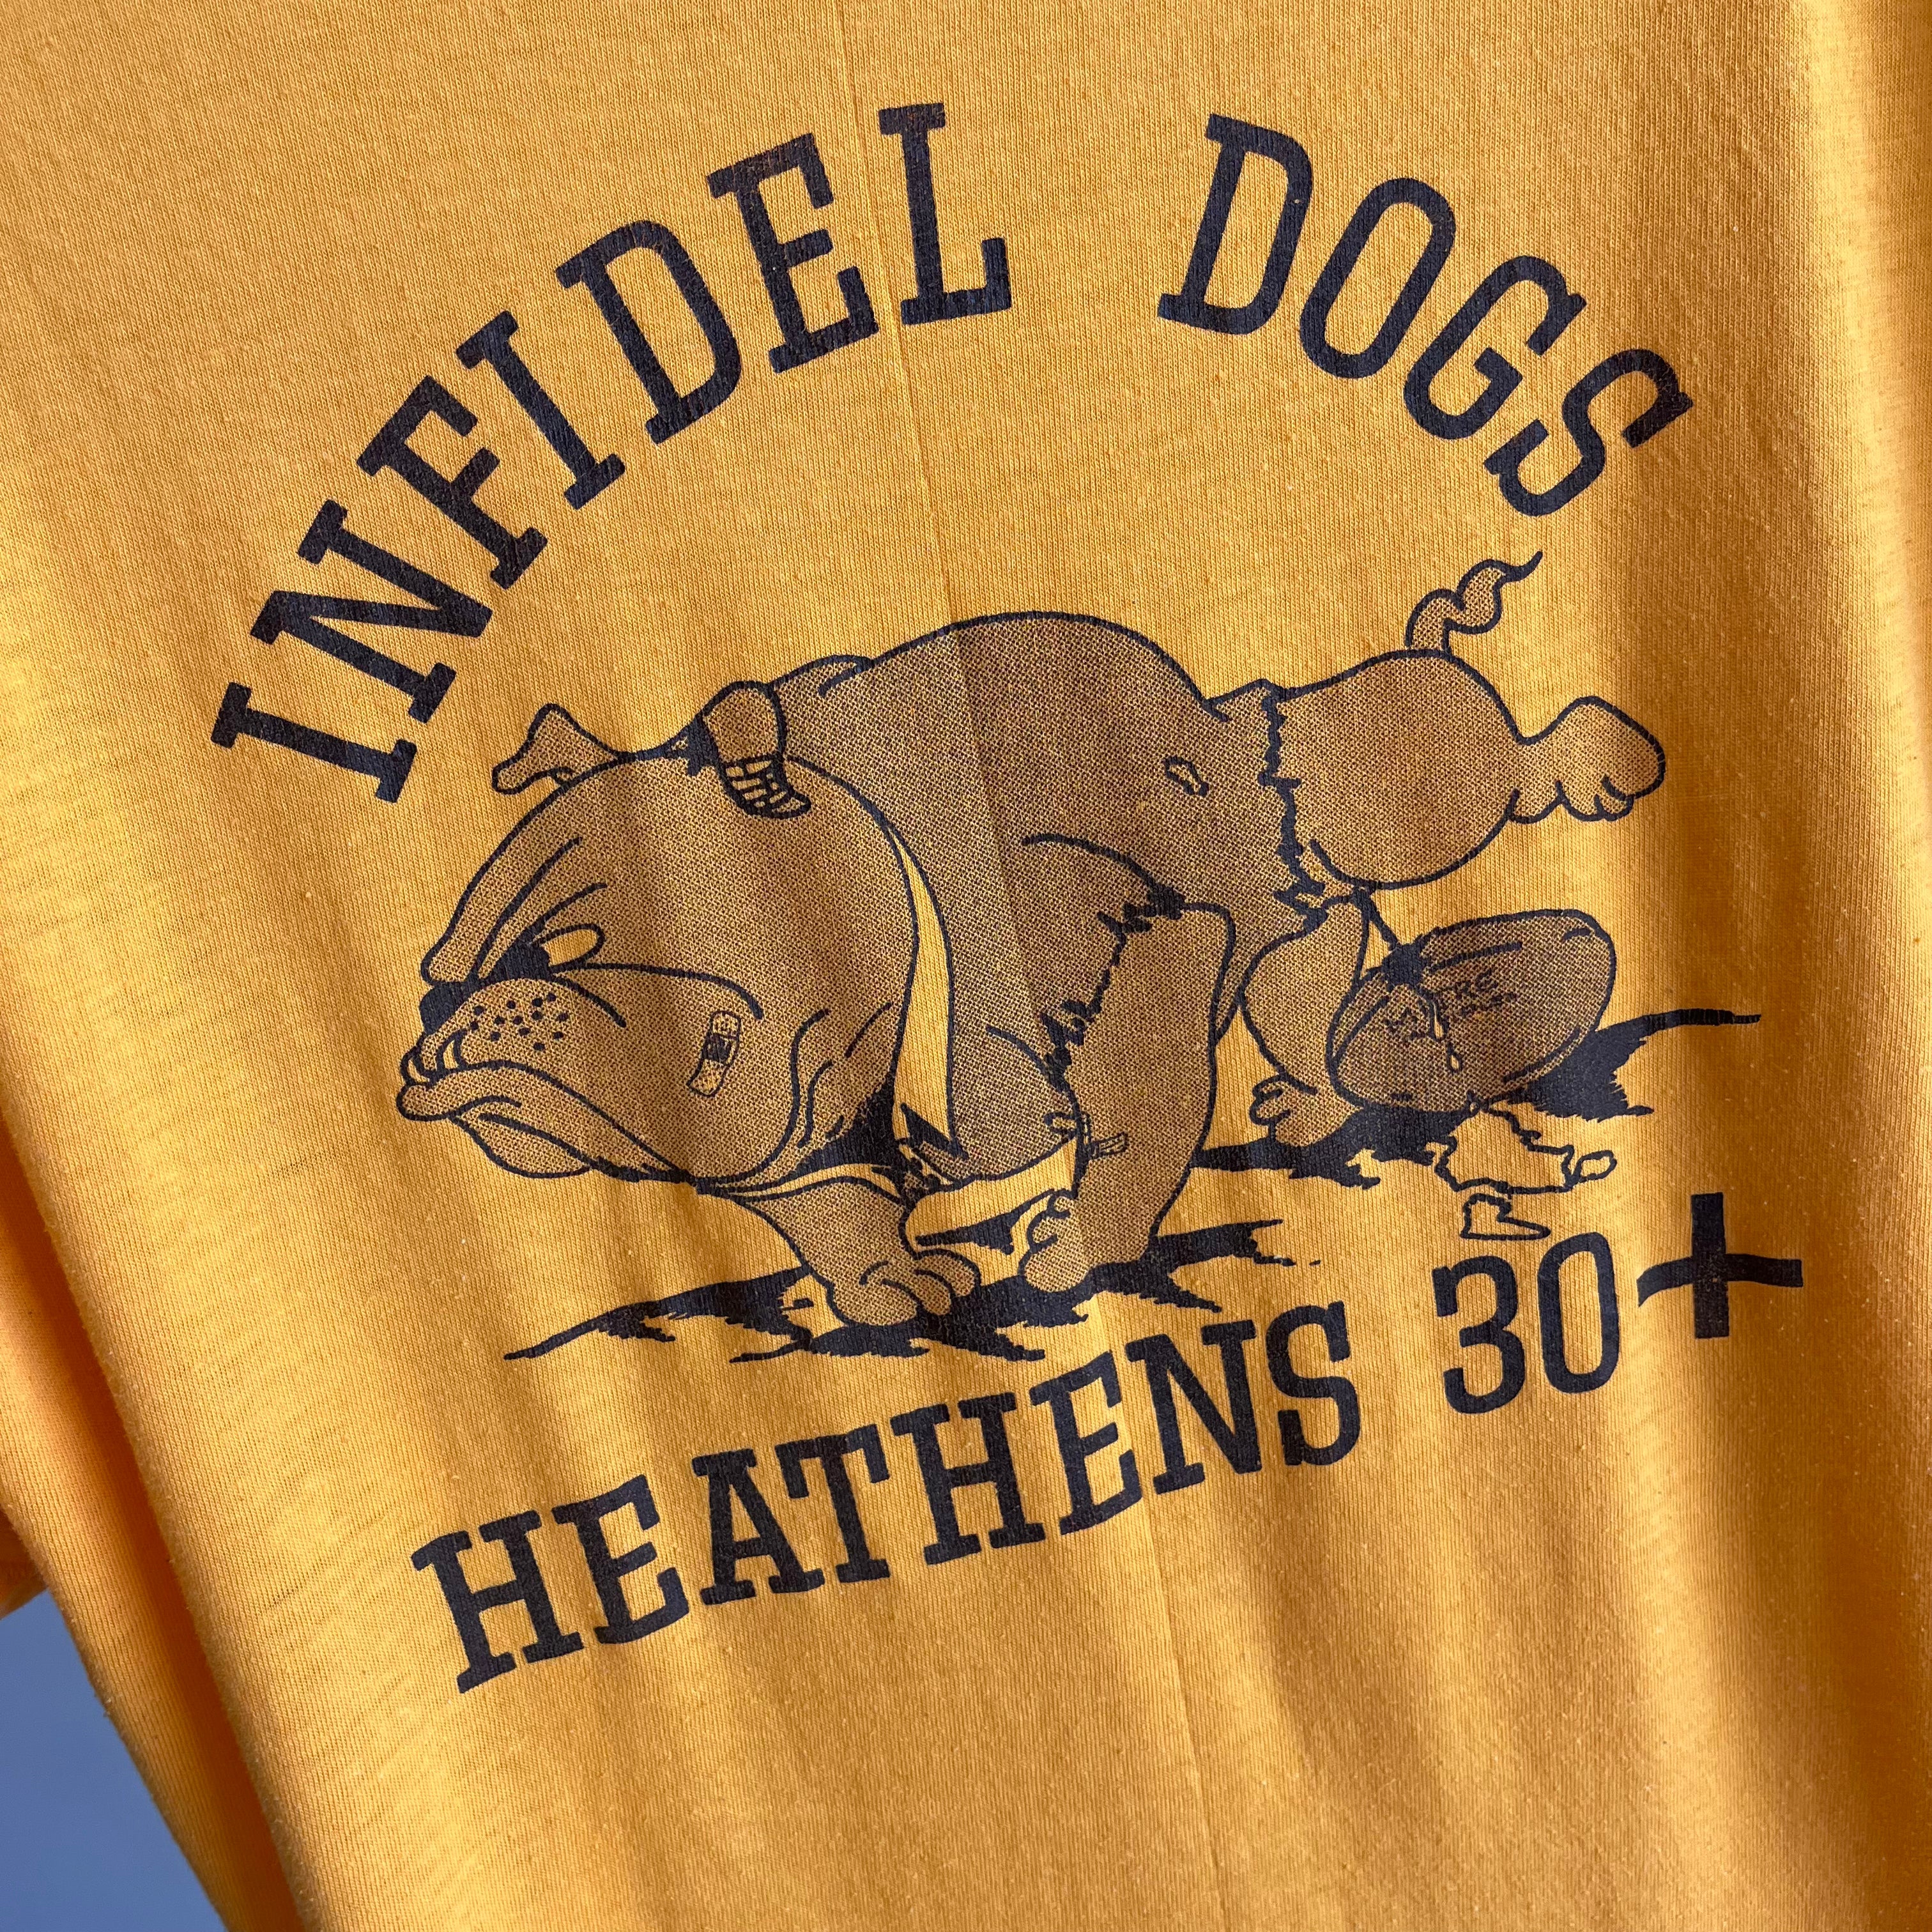 1970s Houston Heathens Rugby Over 30 - Infidel Dogs - OMG The Backside